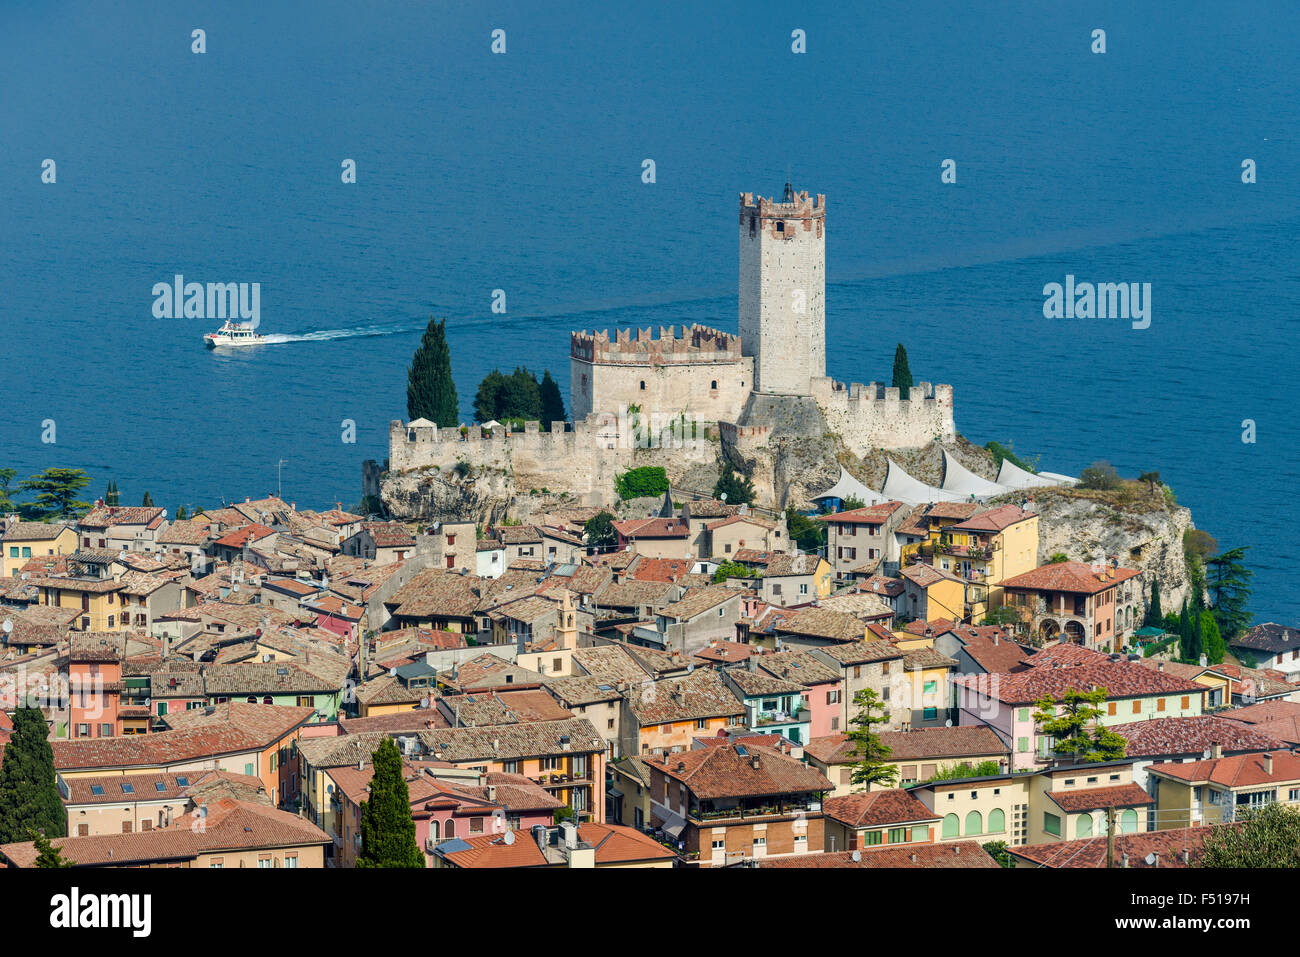 Aerial view of the old town, located at the shore of Lake Garda Stock Photo